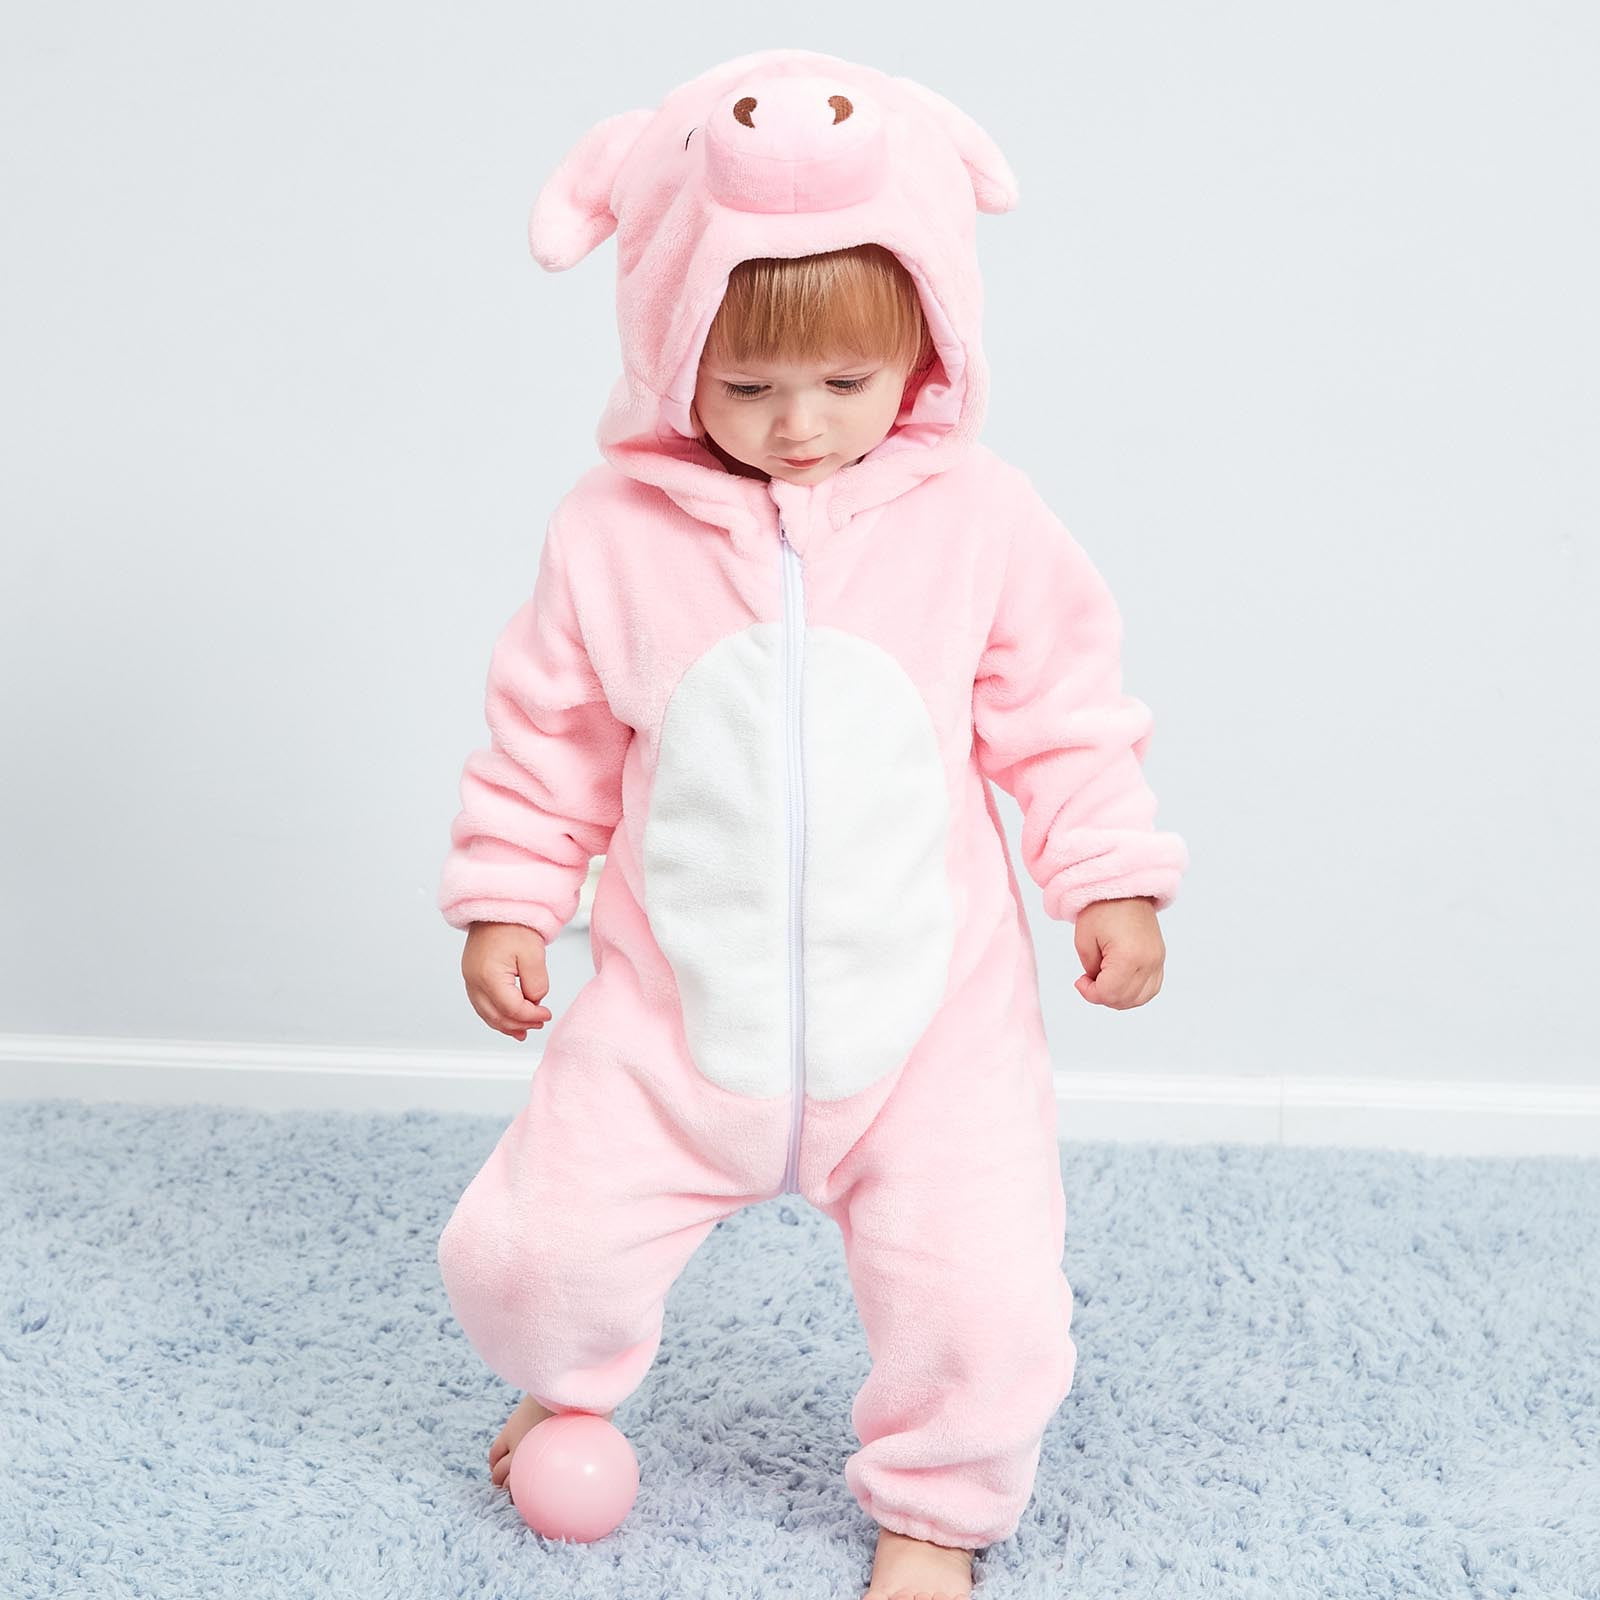 Cute Pink Pig Newborn Baby Bodysuit Long Sleeve Overalls Outfits Clothes Romper Jumpsuit for Baby Boy Girl 